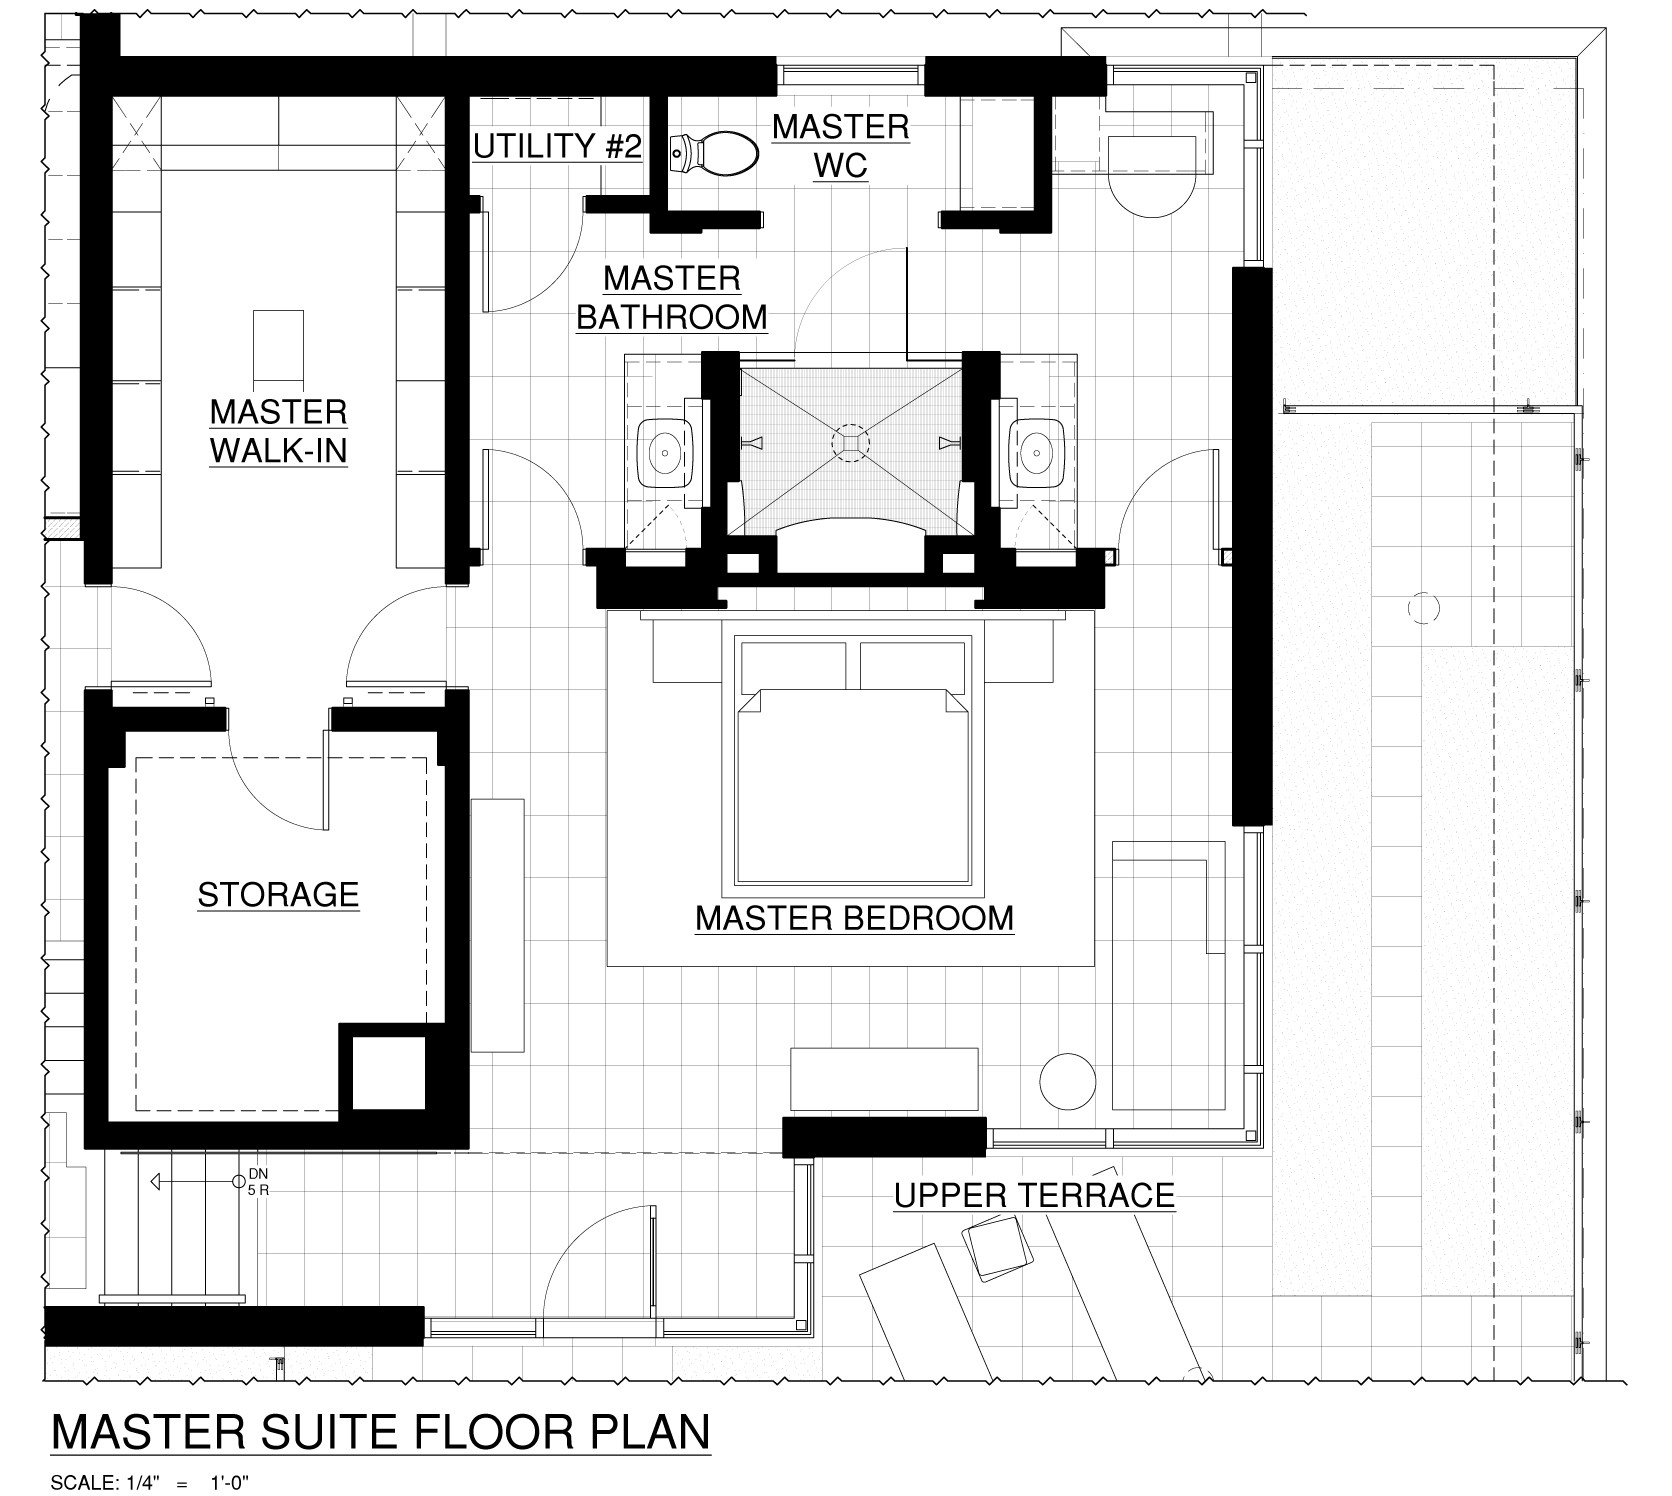 Master Bedroom Floor Plans
 Deep River Partners Ltd Milwaukee WI Architects and